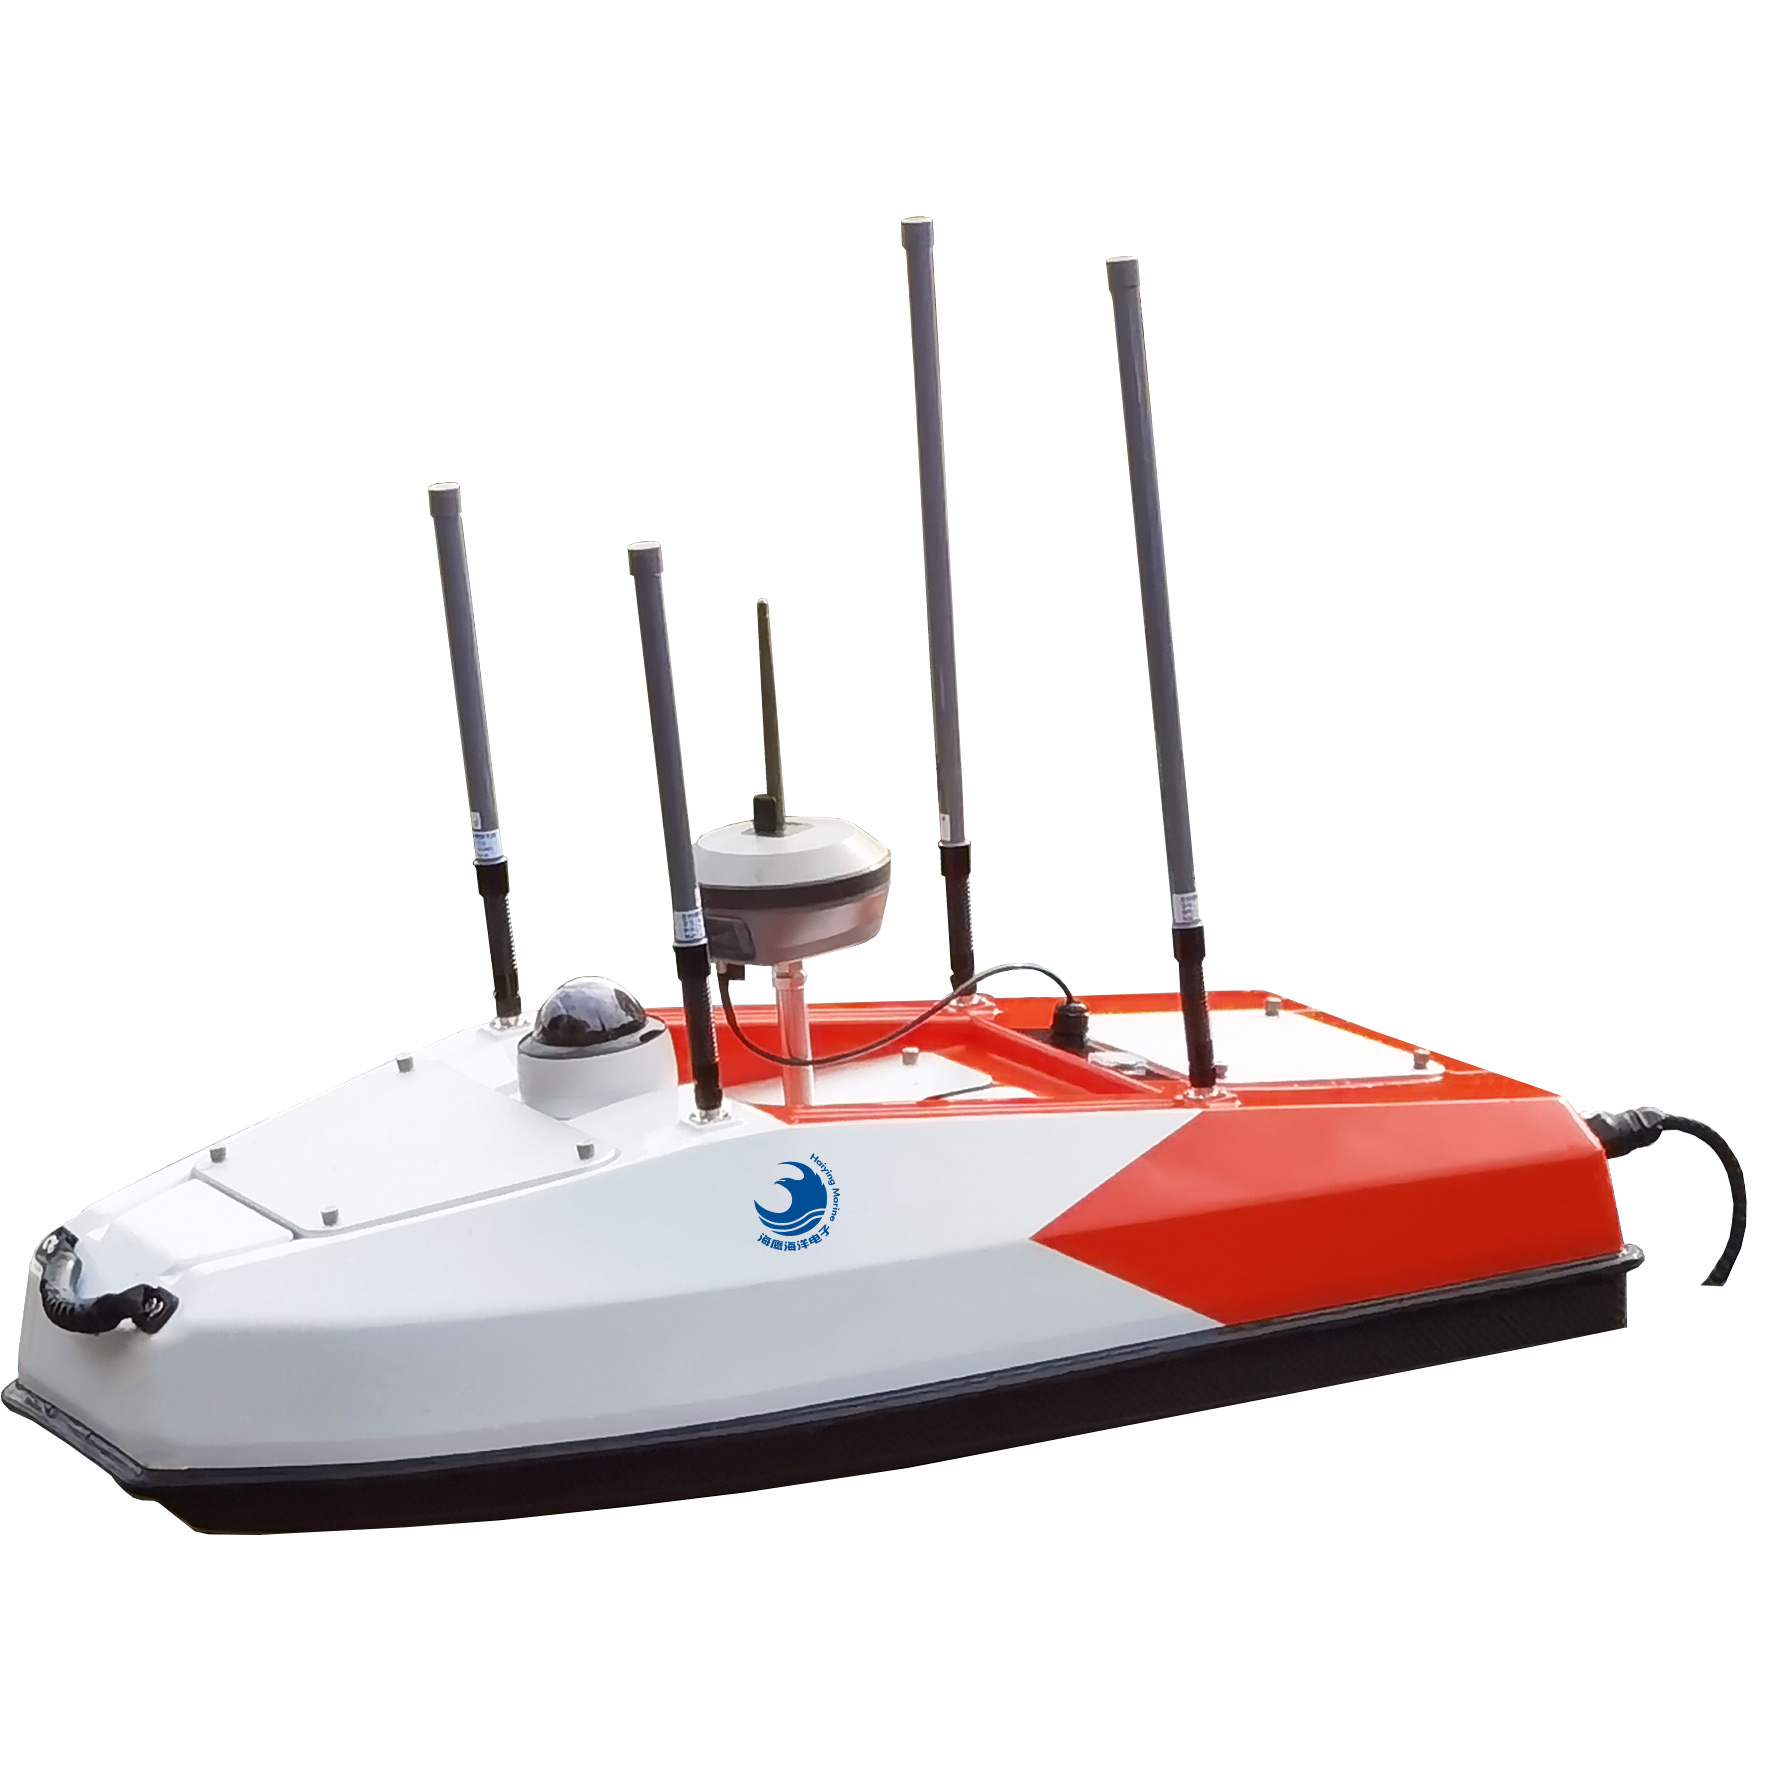 HY-USV01 multifunctional unmanned surface vessel